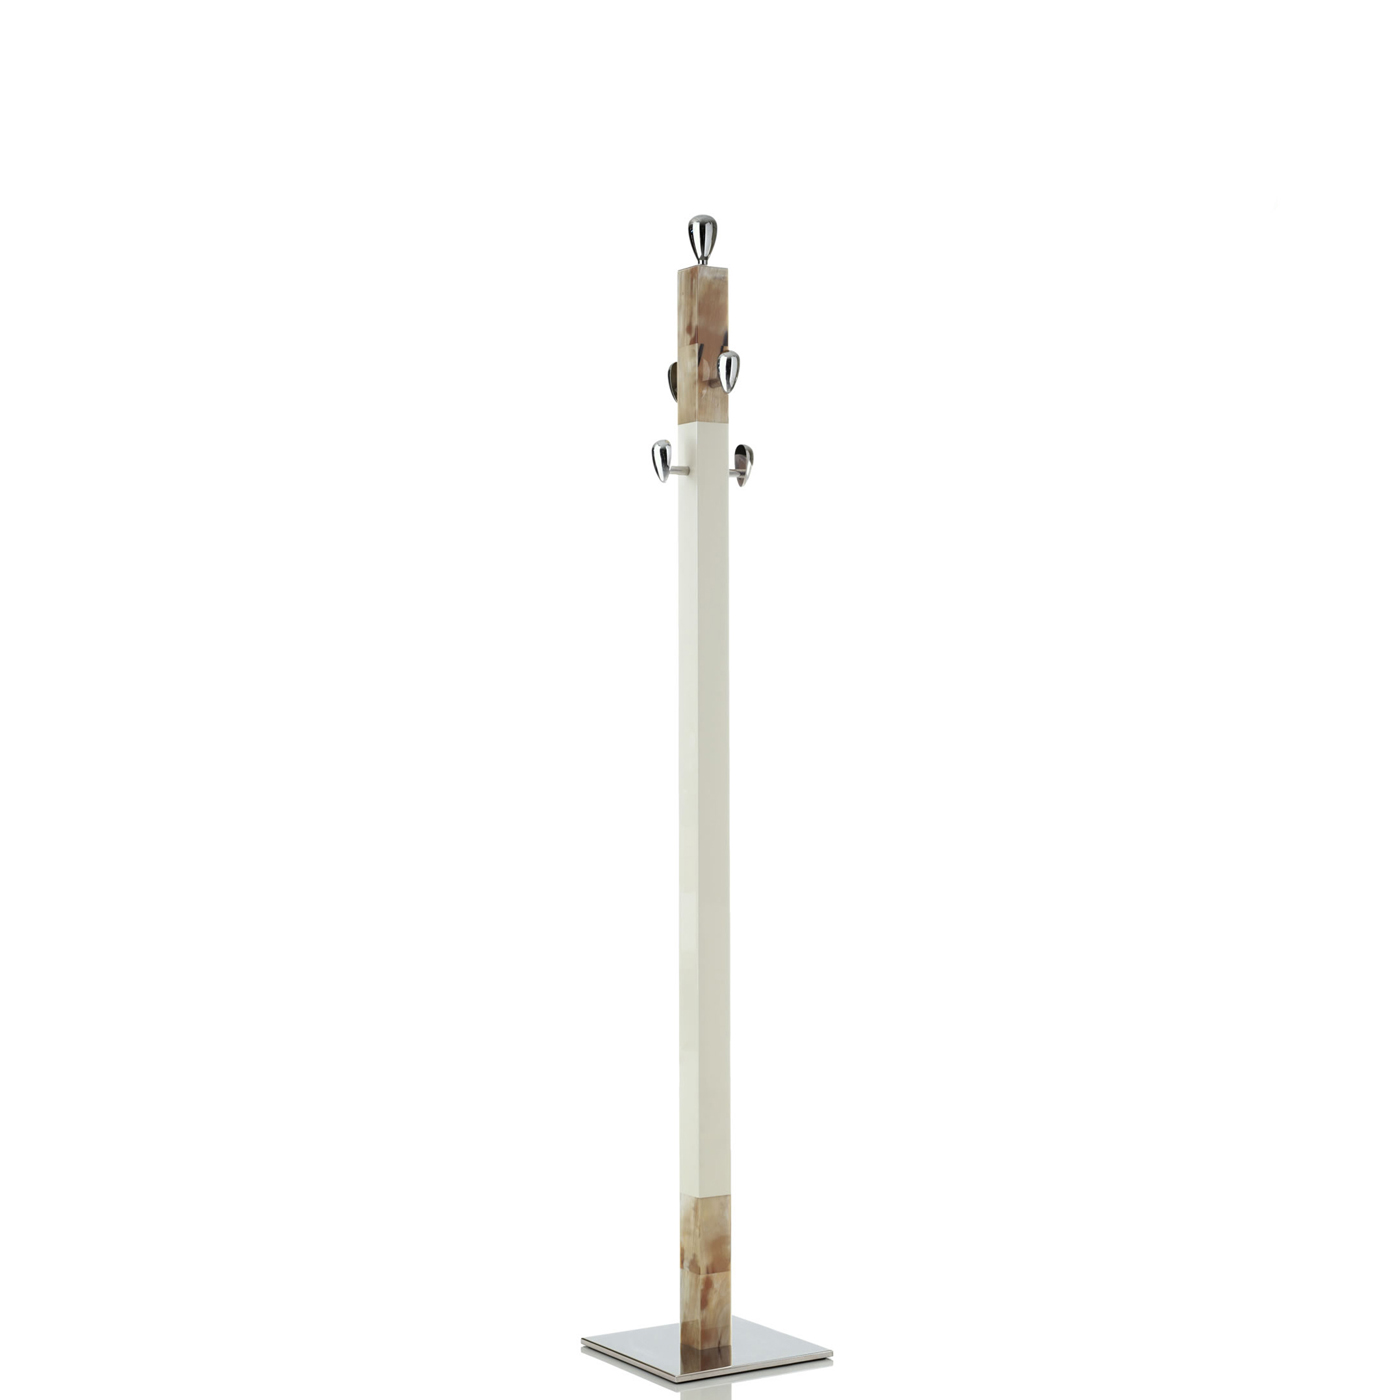 Coat stand and complementary furniture - Giglio coat stand in ivory lacquered wood and horn - Arcahorn